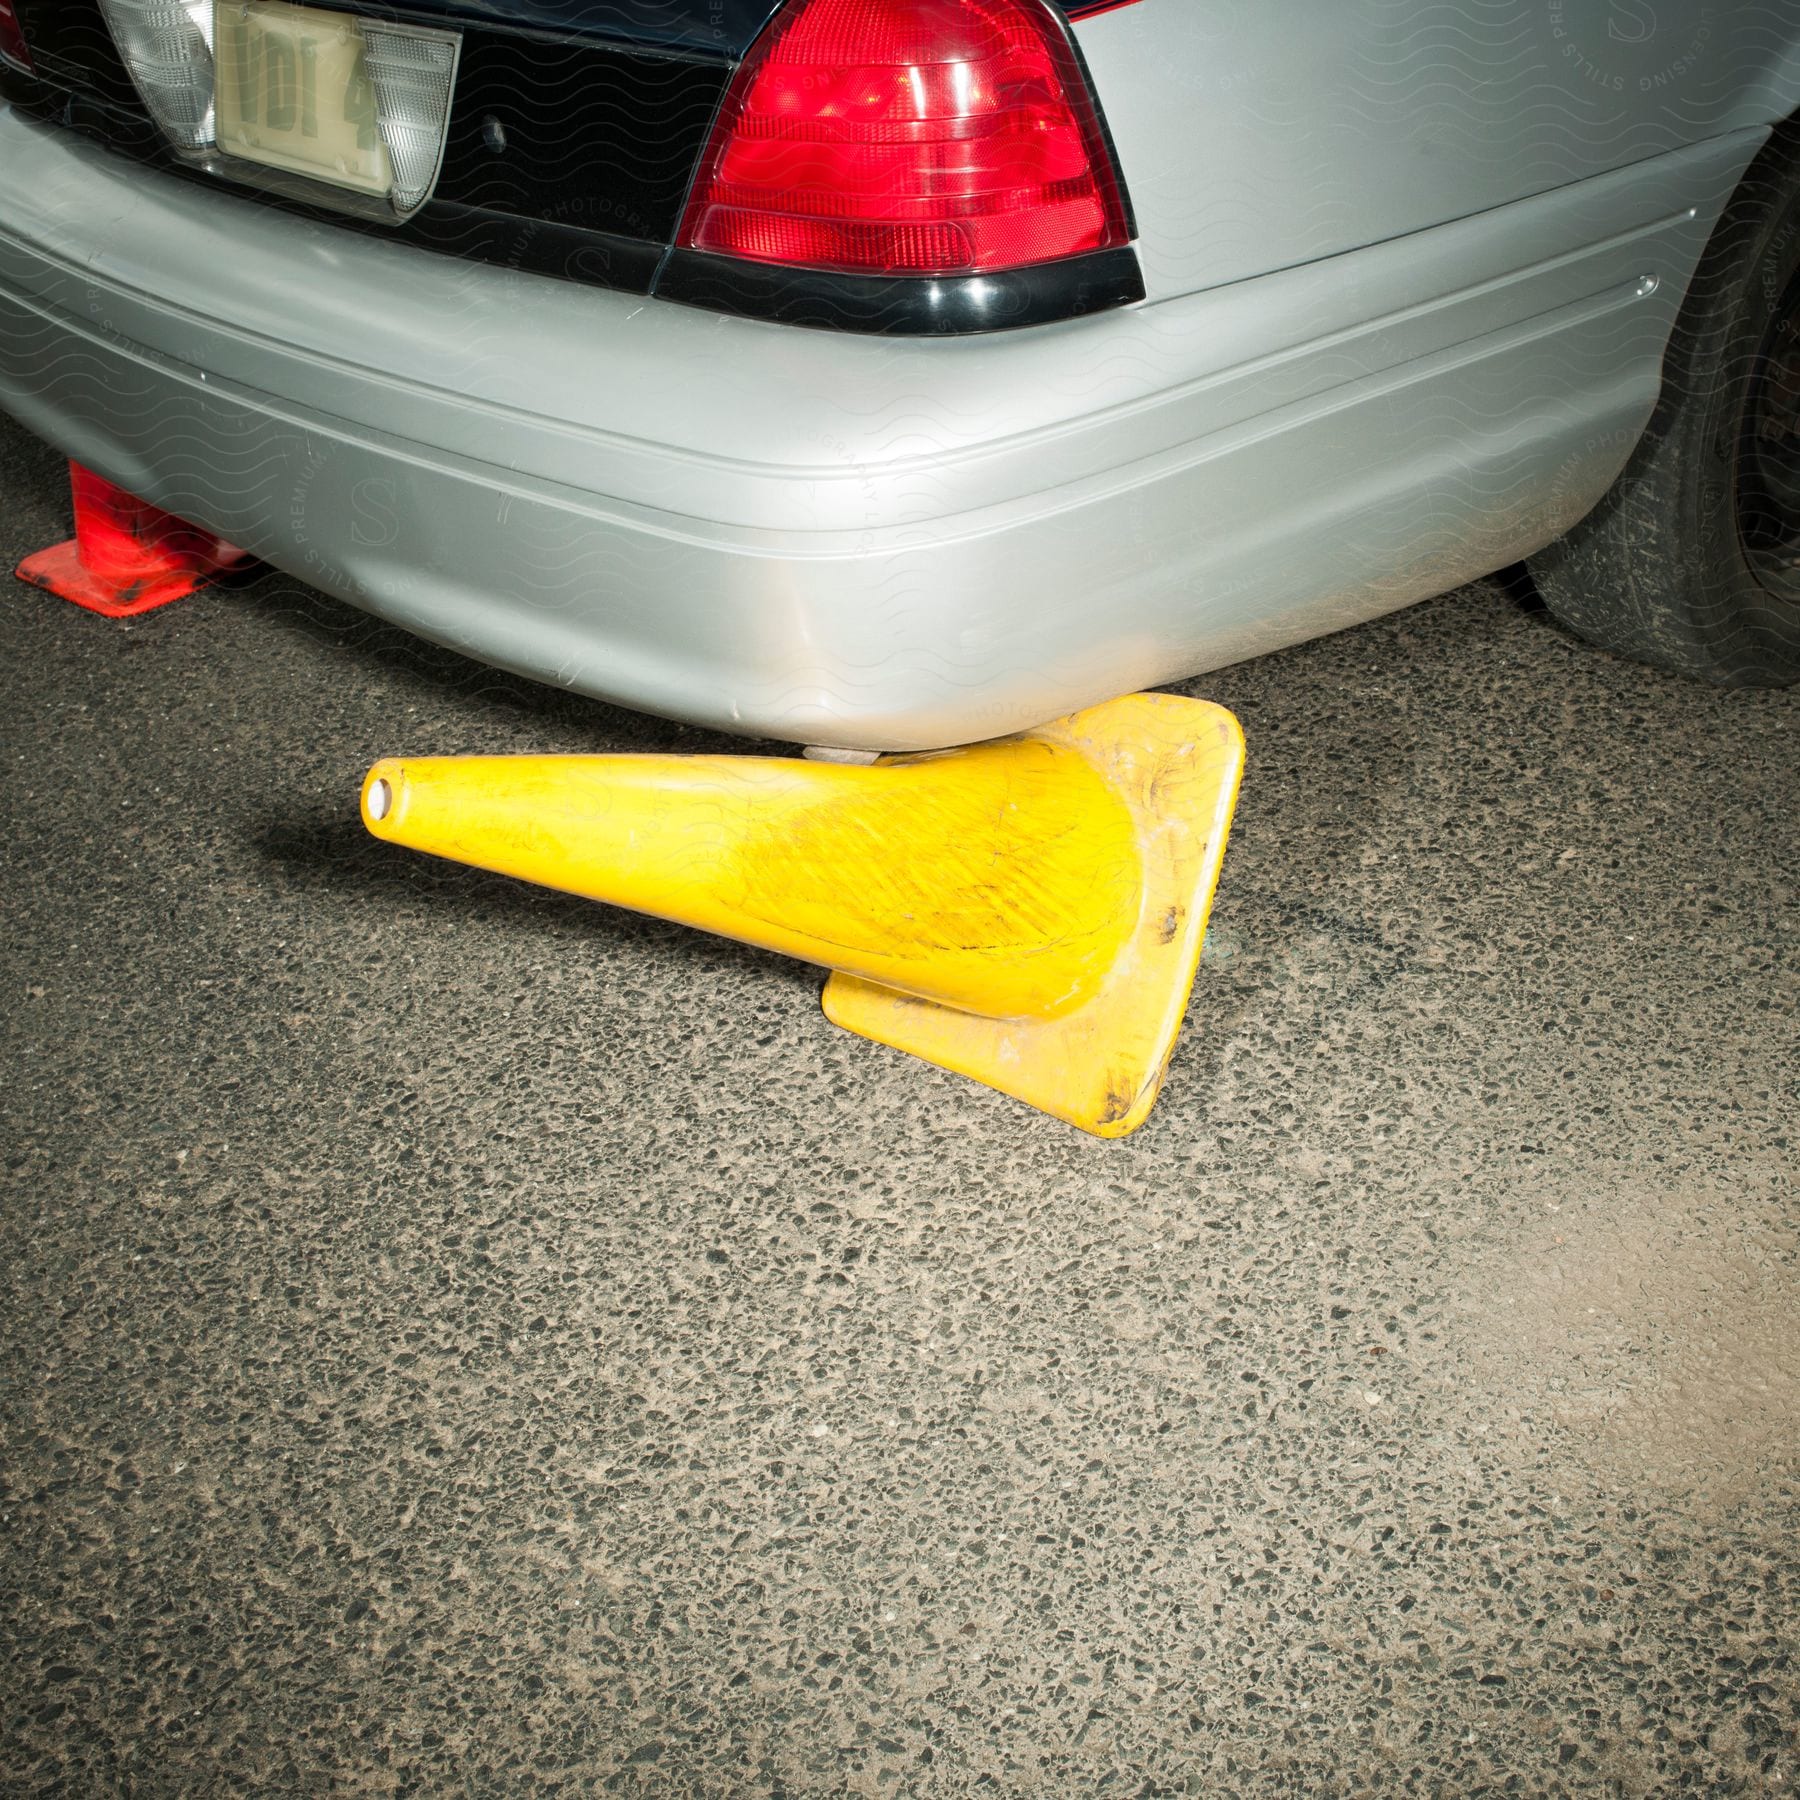 A car knocks over a yellow safety cone while backing up